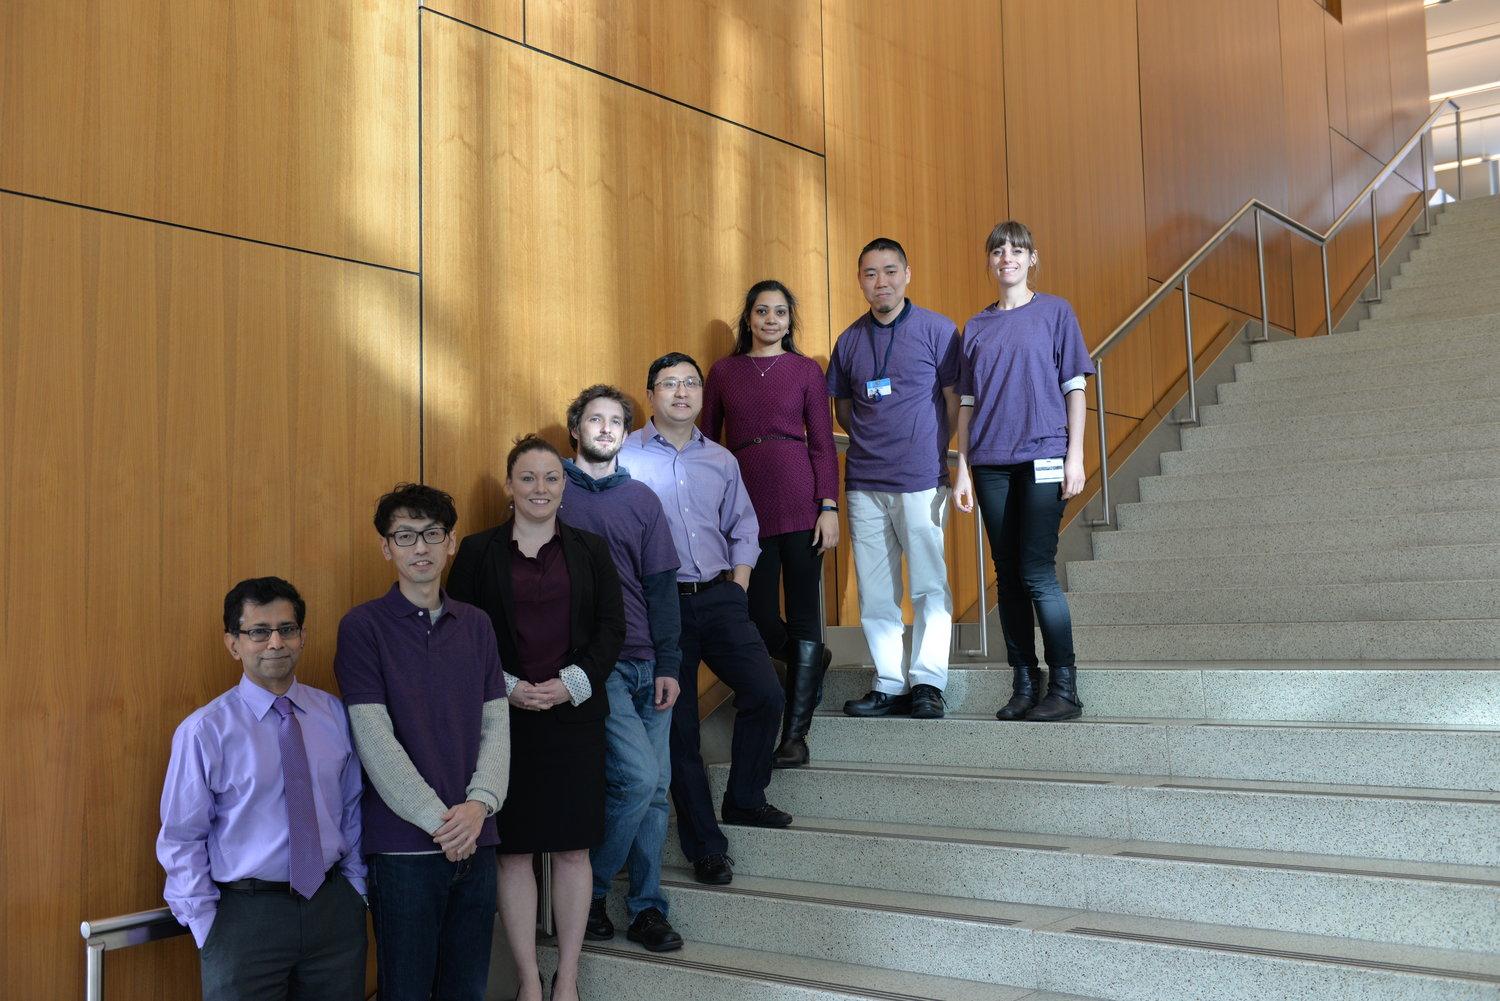 Lab dressed in purple in honor of World Pancreatic Cancer Day.